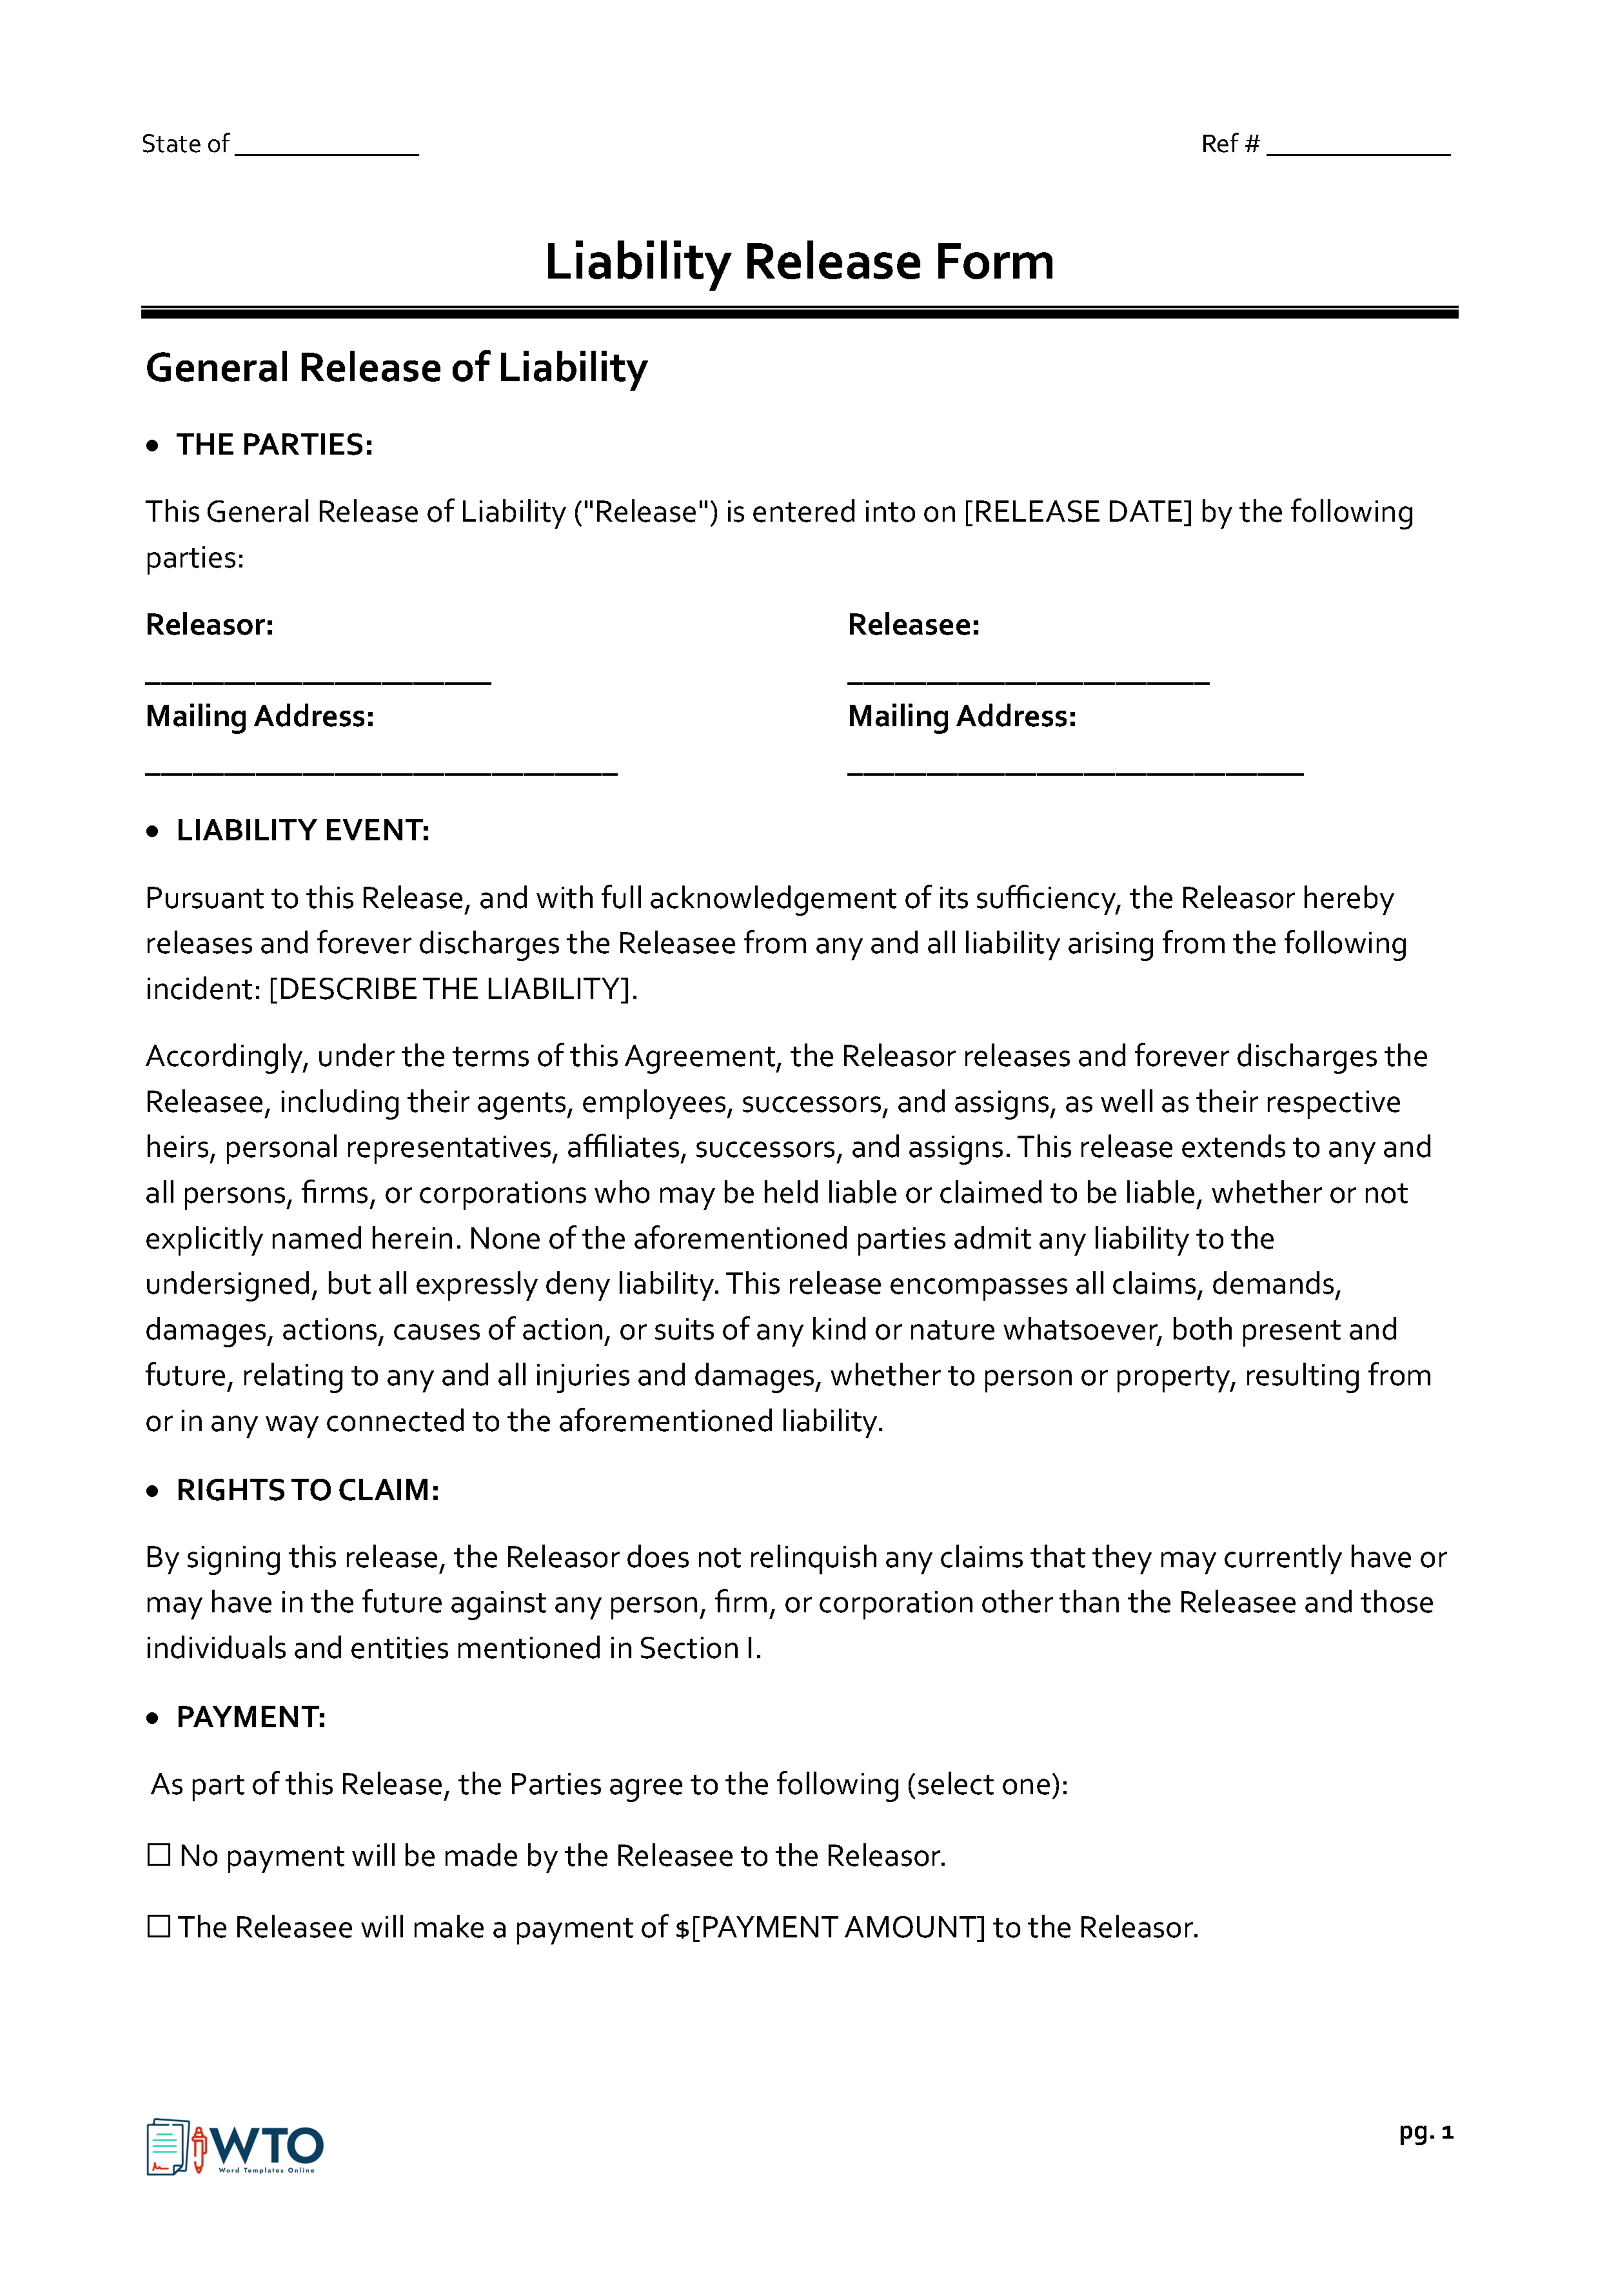 Free Downloadable General Release of Liability Form for Word Document